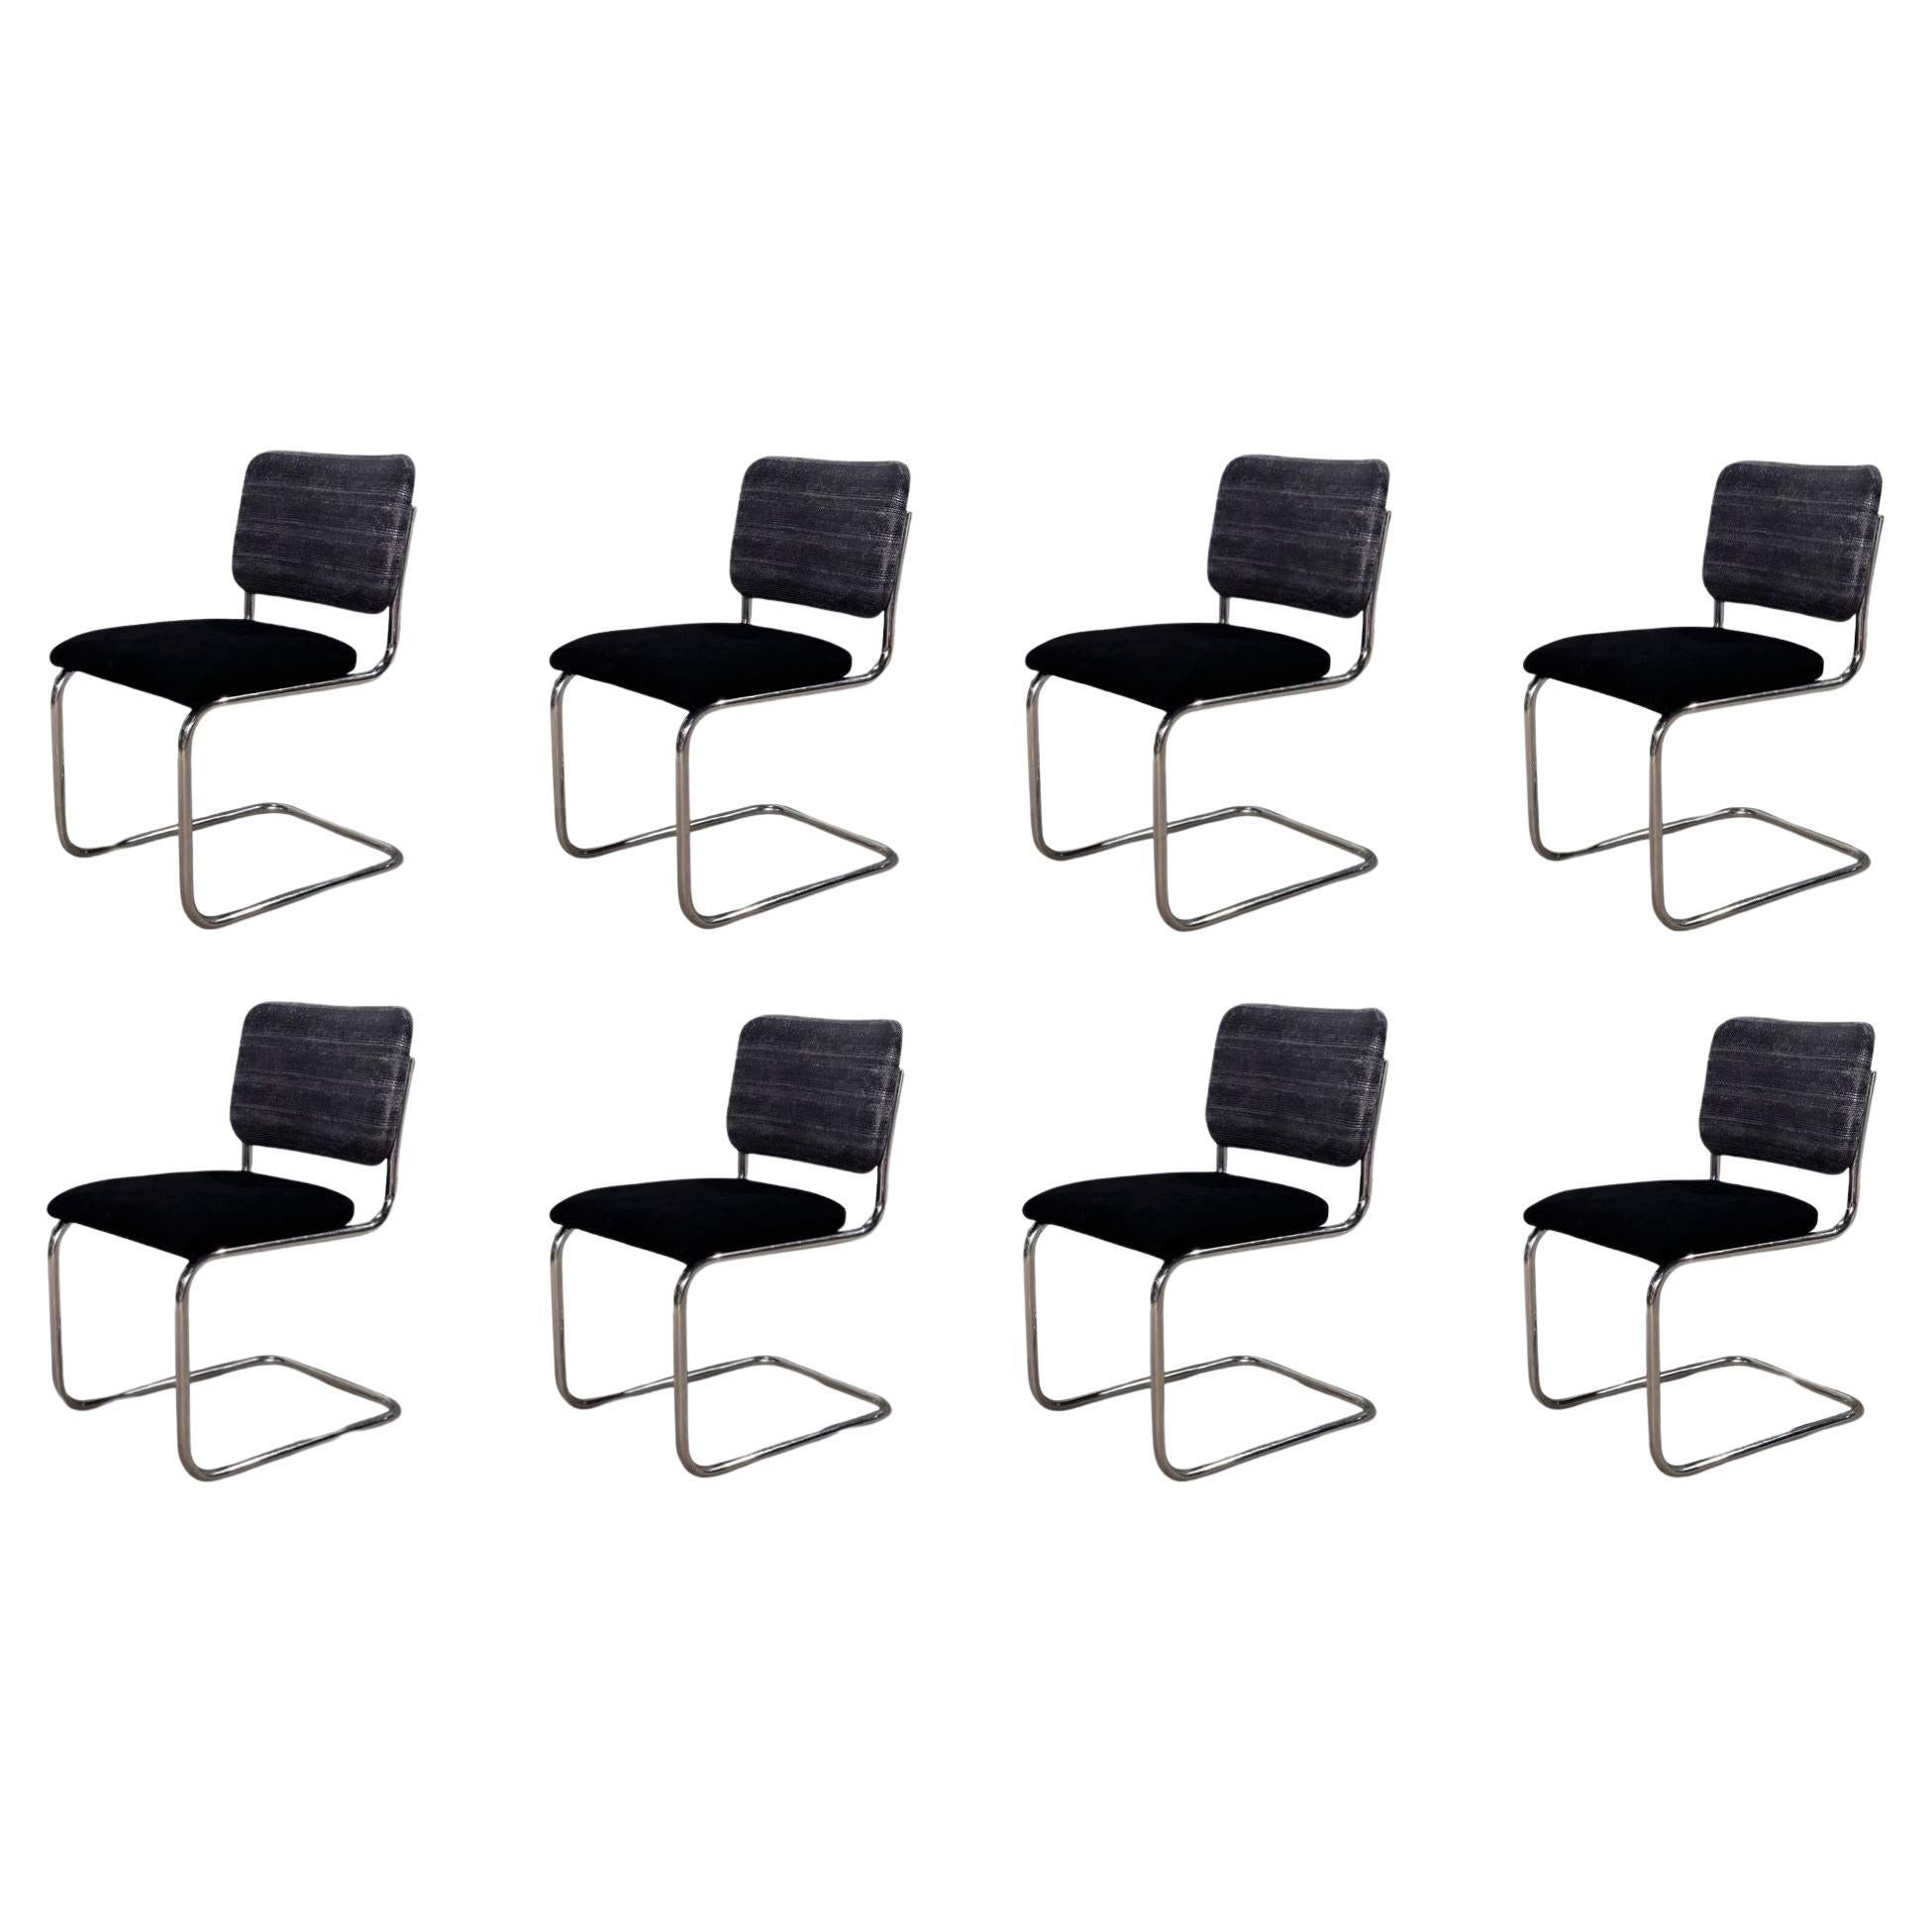 8 Marcel Breuer Black Leather Cesca Side/Dining Chairs for Knoll, 1980 For Sale